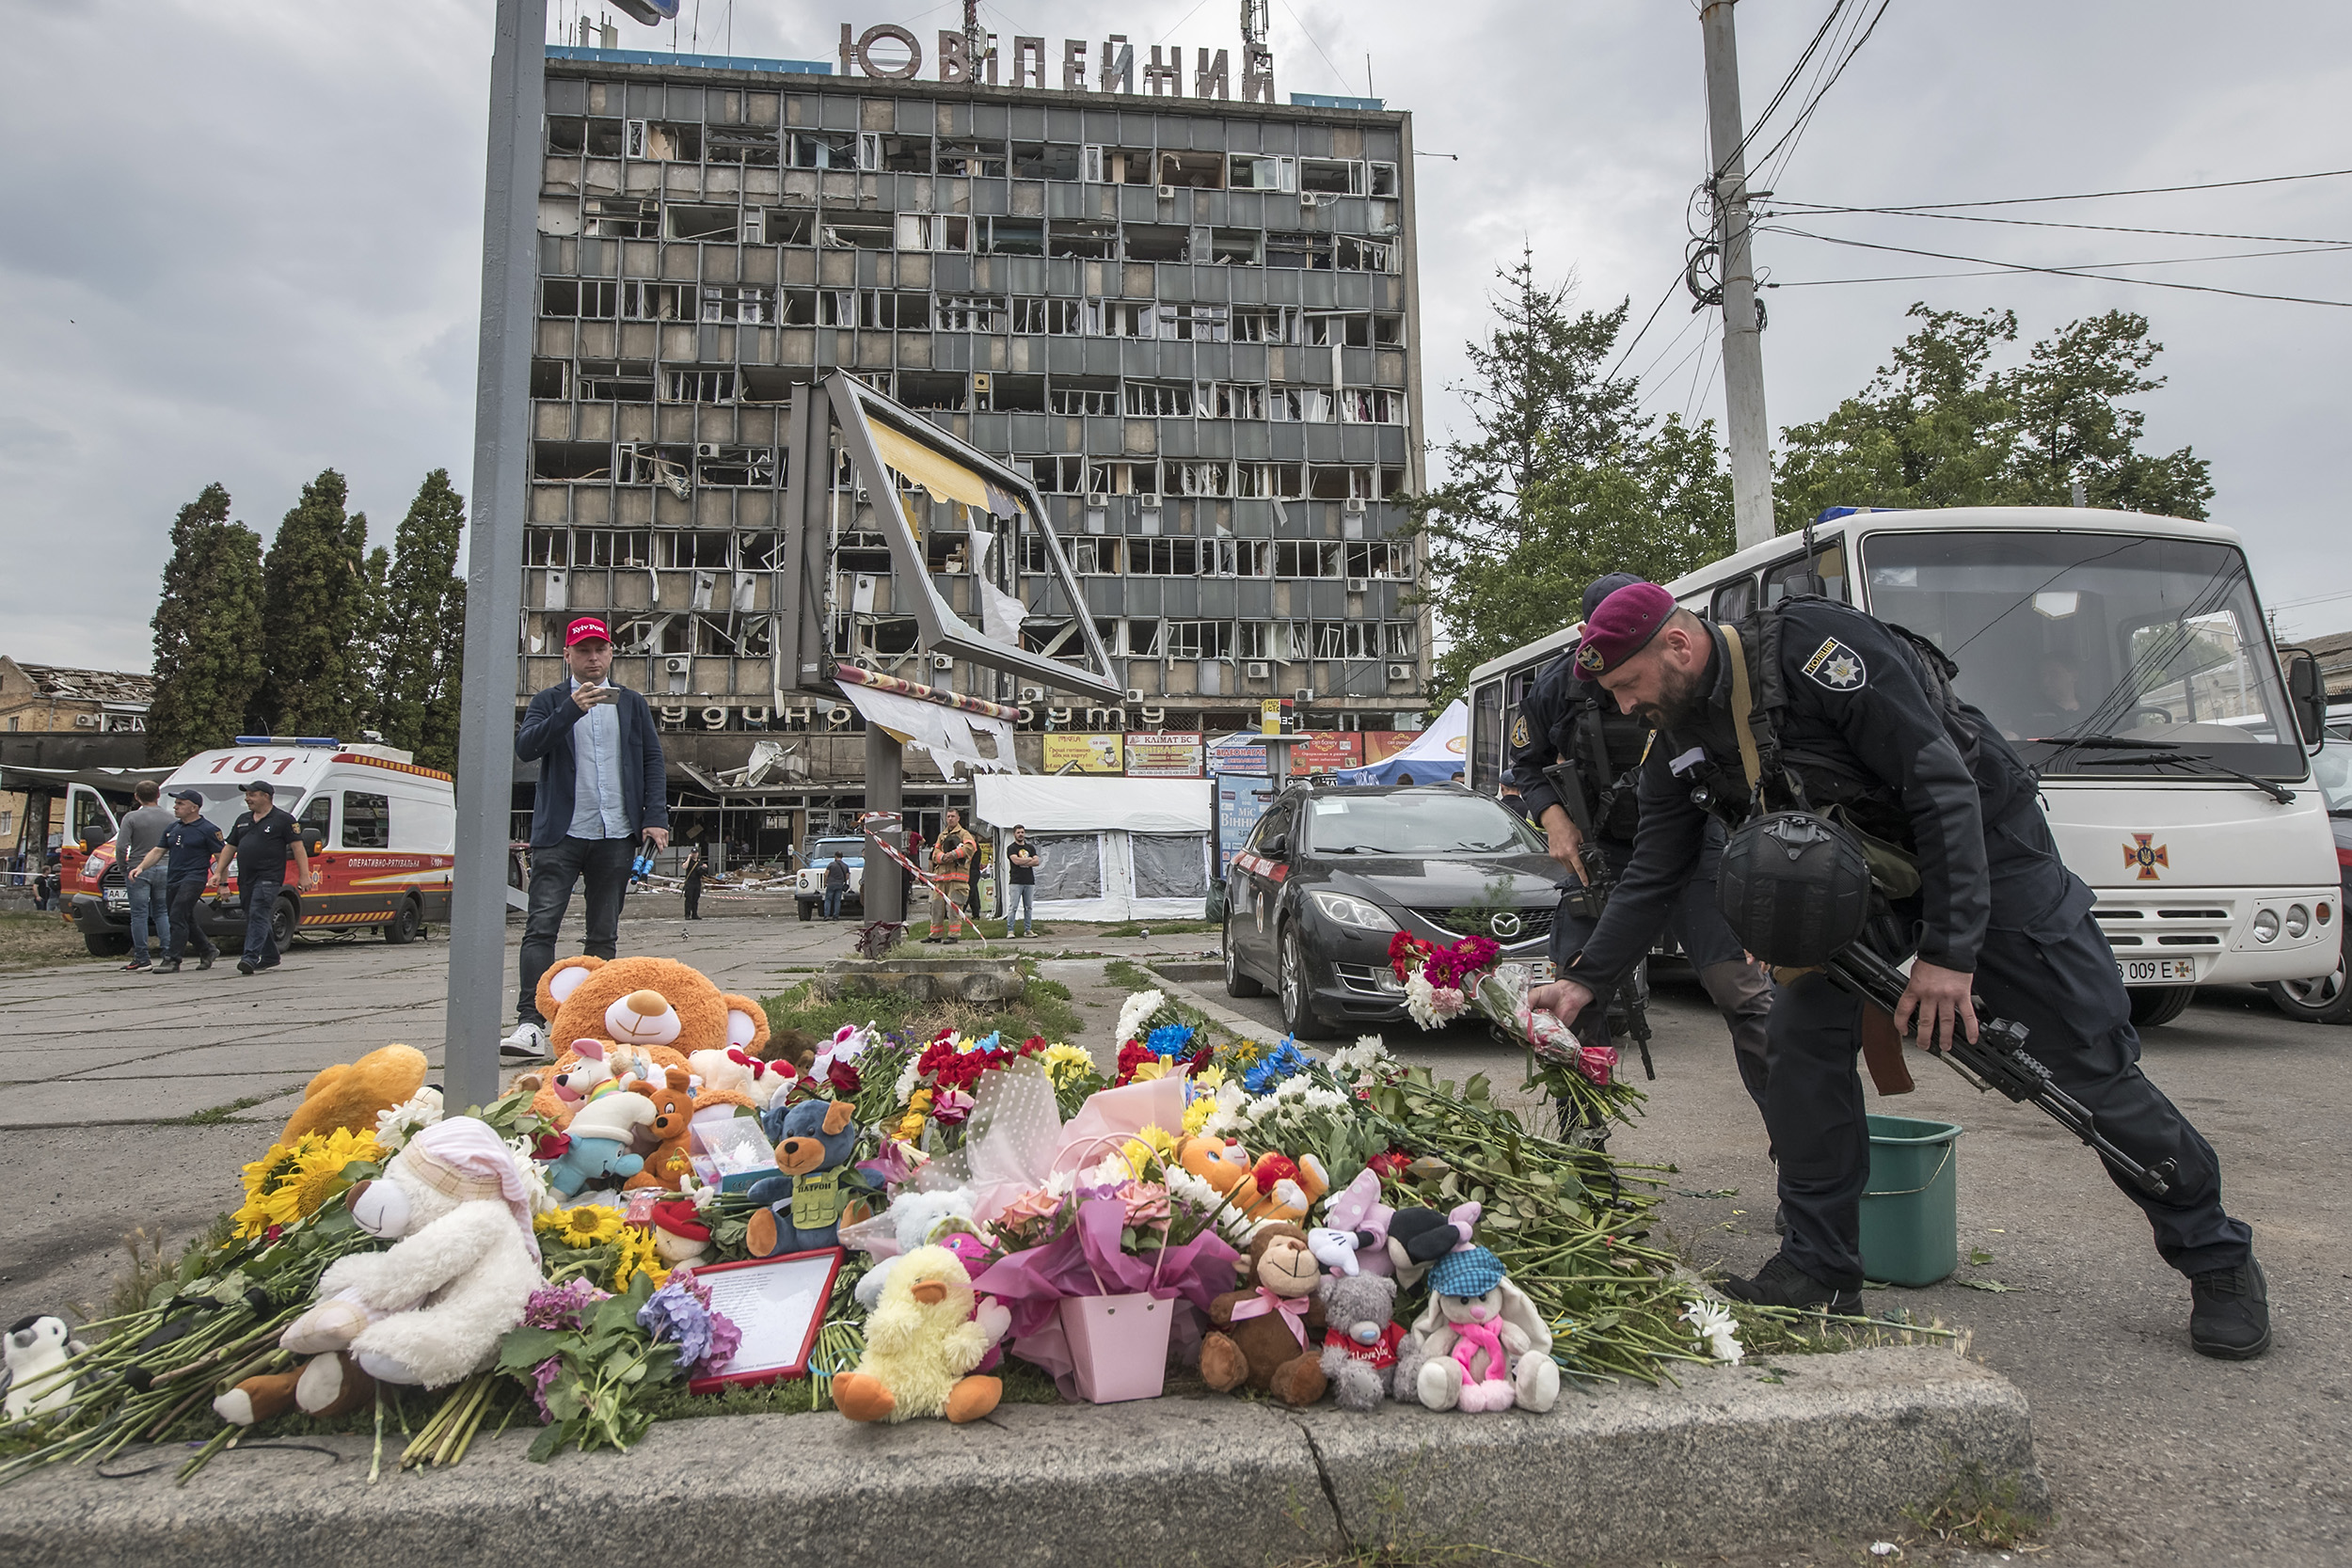 Ukrainian servicemen lay flowers and toys at a place where a child was killed during a Russian cruise missile strike in Vinnytsia, Ukraine, on July 15.